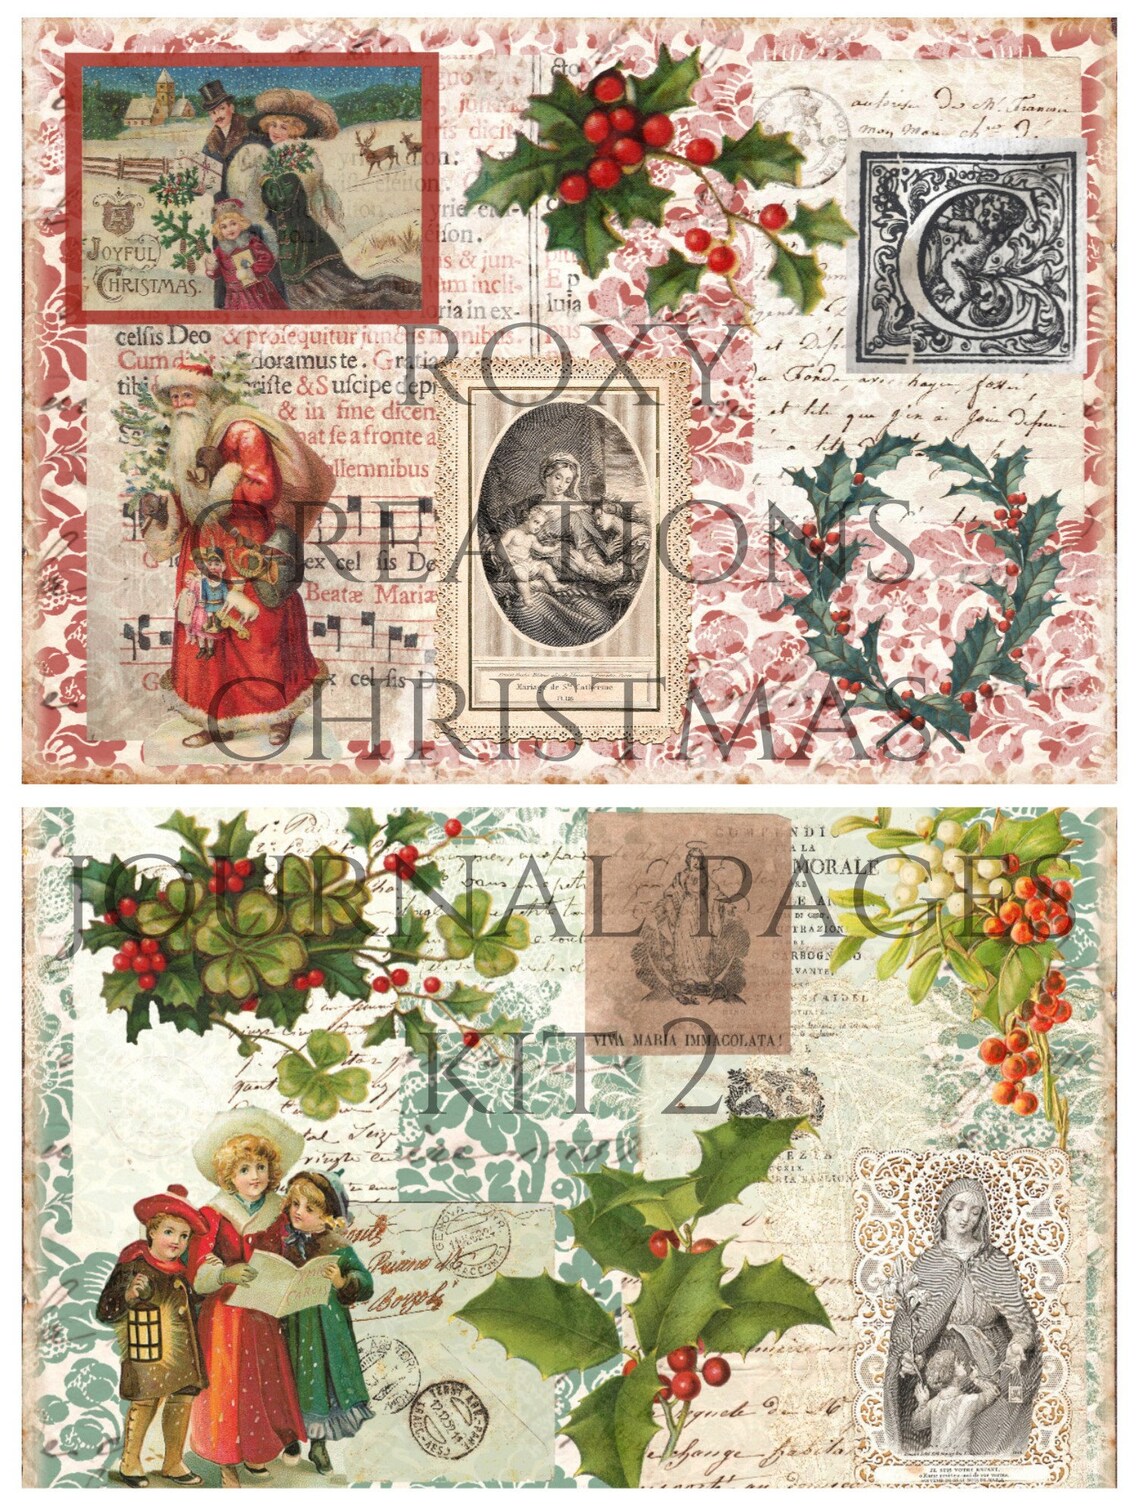 Printable Christmas Junk Journal Pages Kit 2 | Etsy